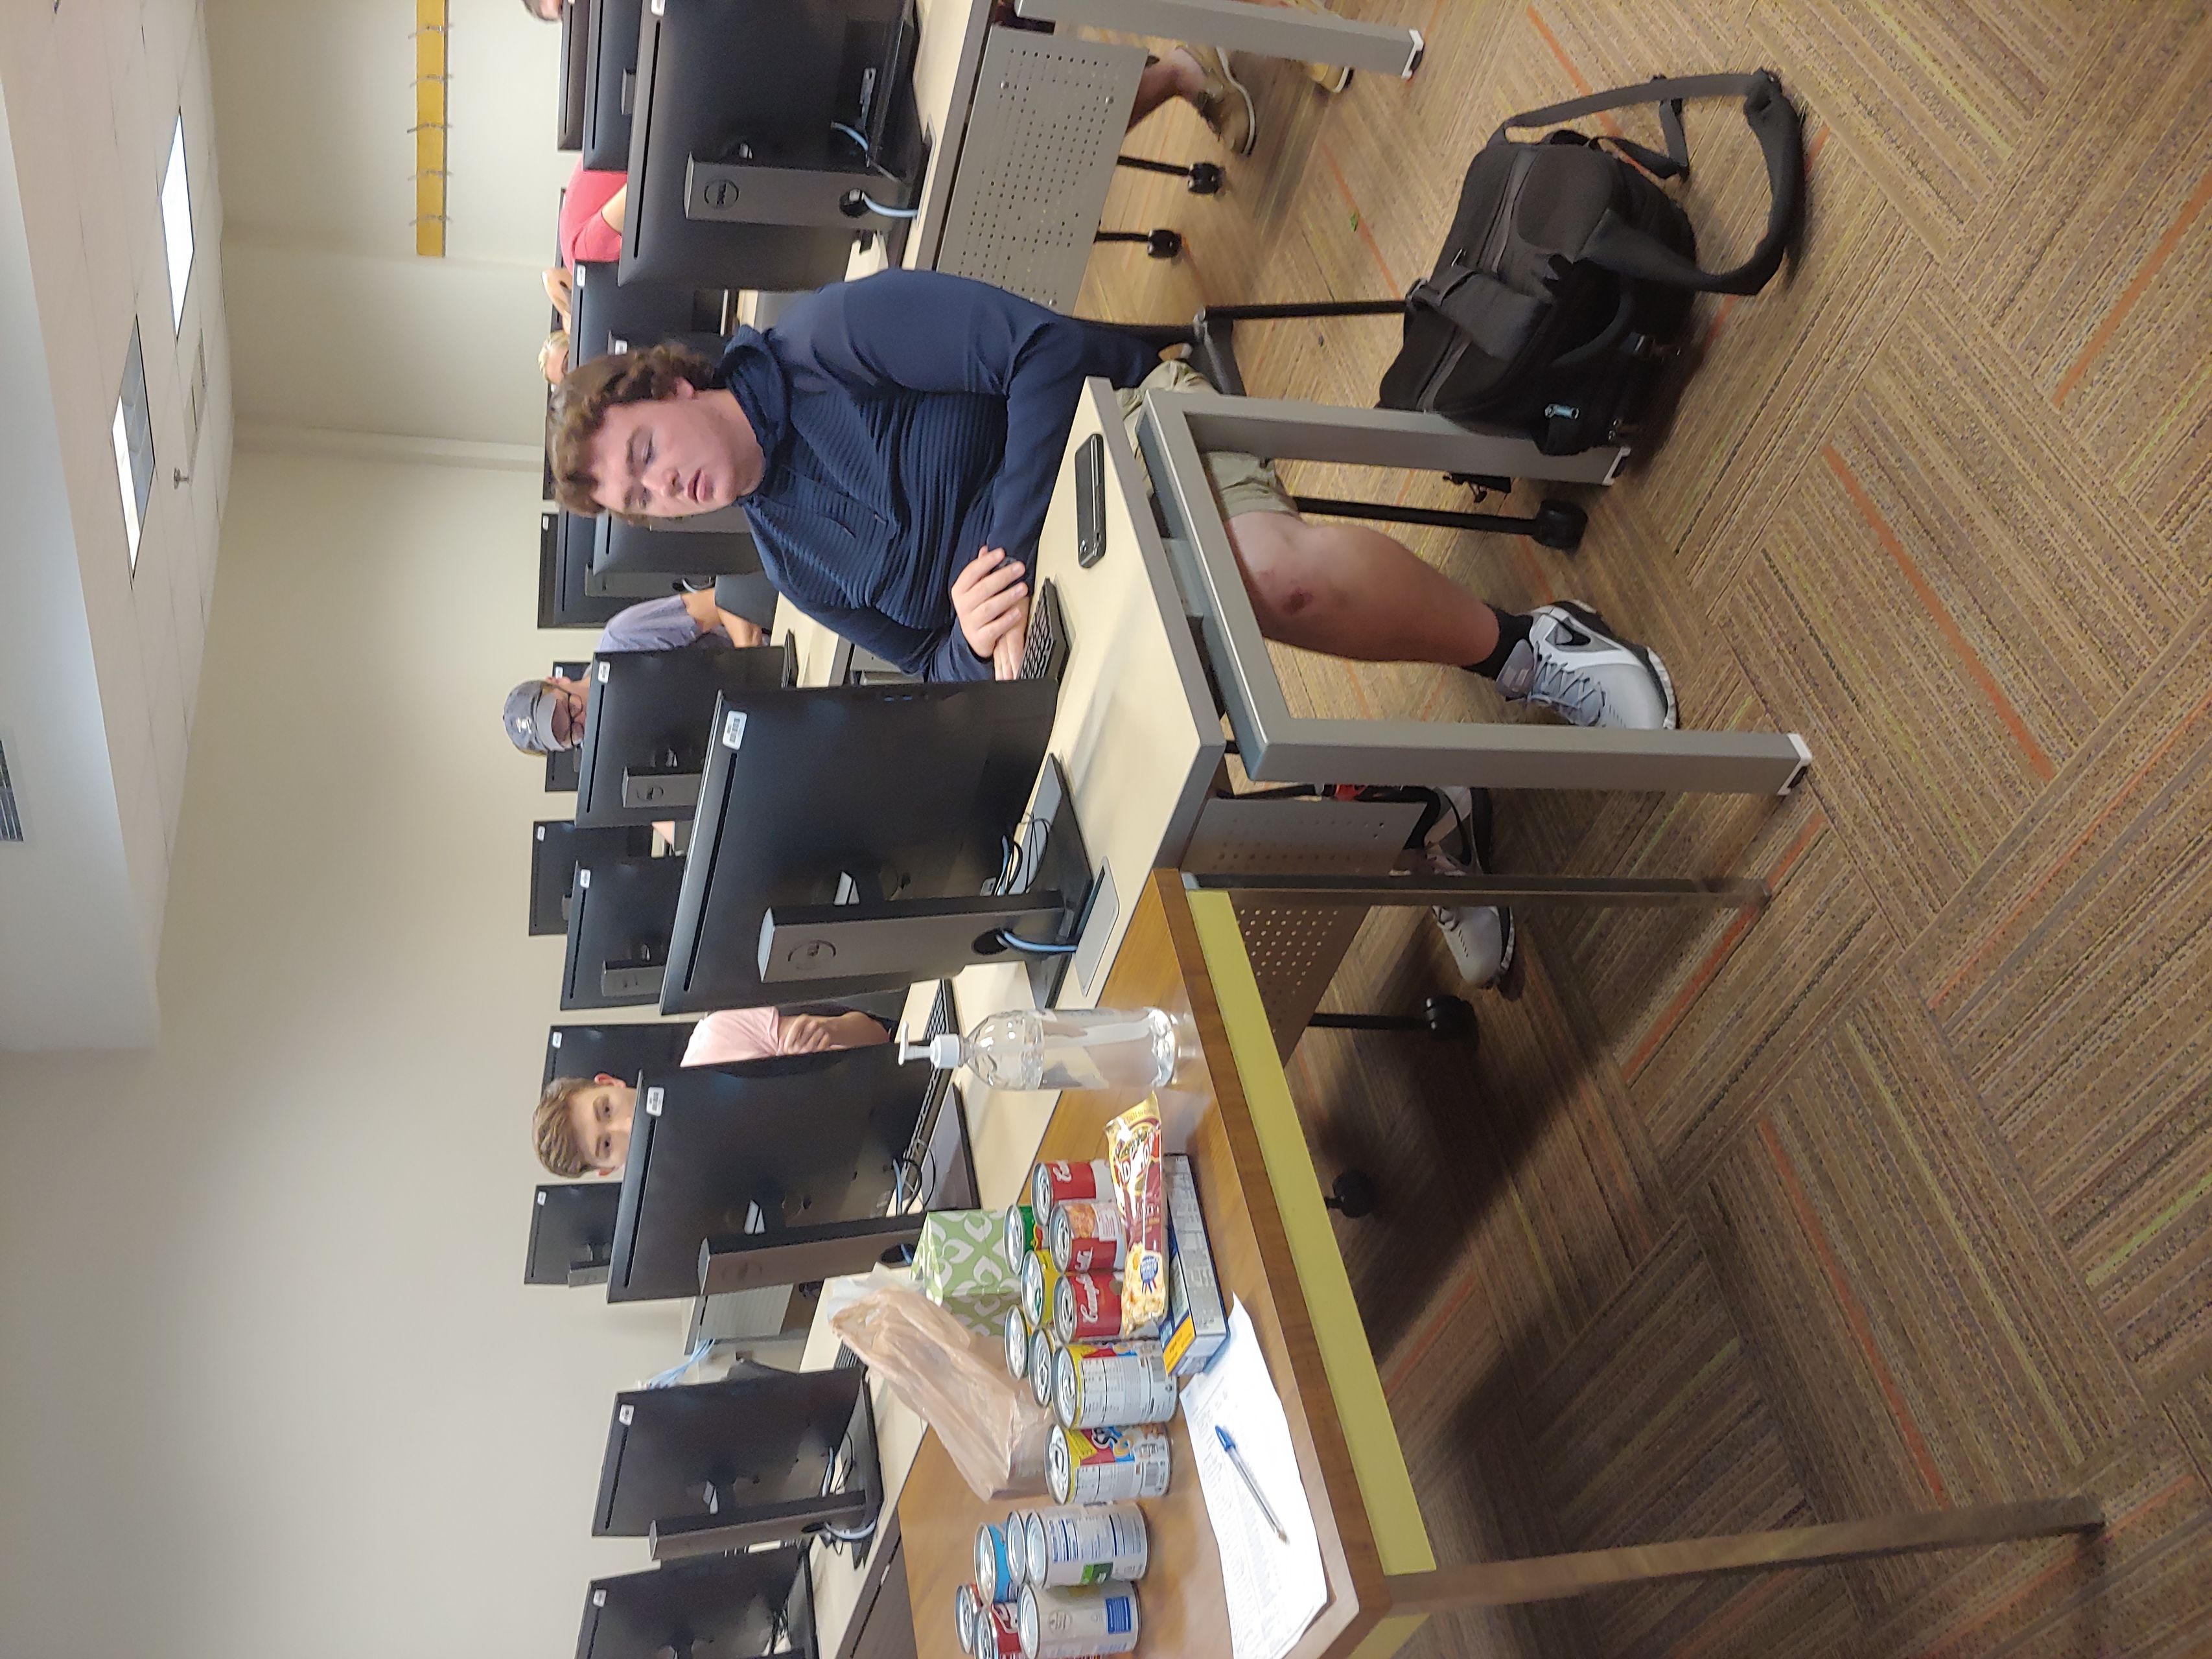 Students sit at computers; on the tables in front of them are cans and boxes of food